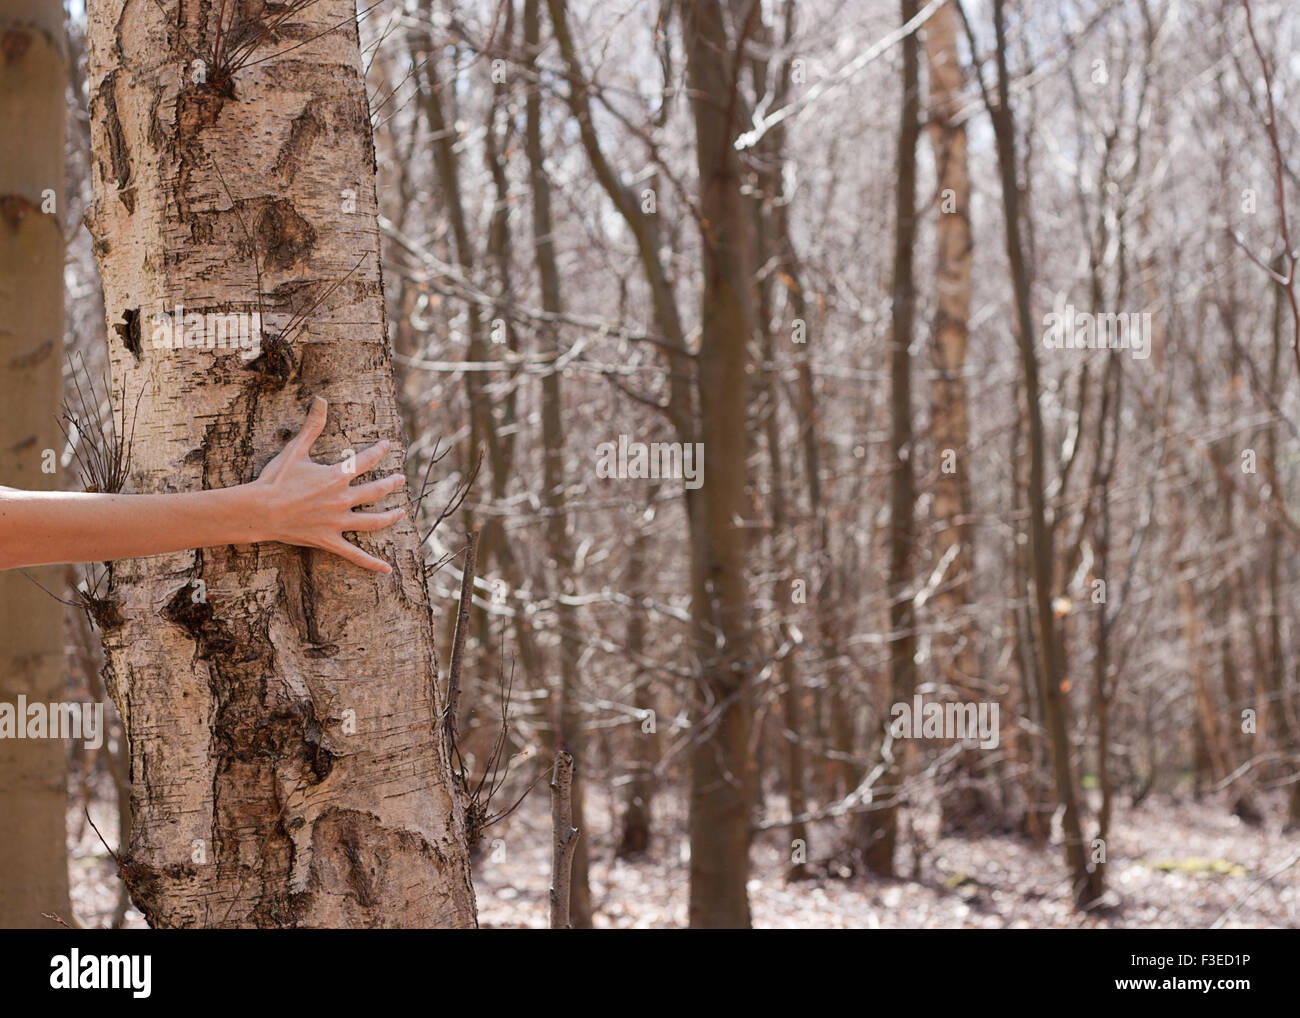 Arm and hand holding tree trunk in wintry forest Stock Photo